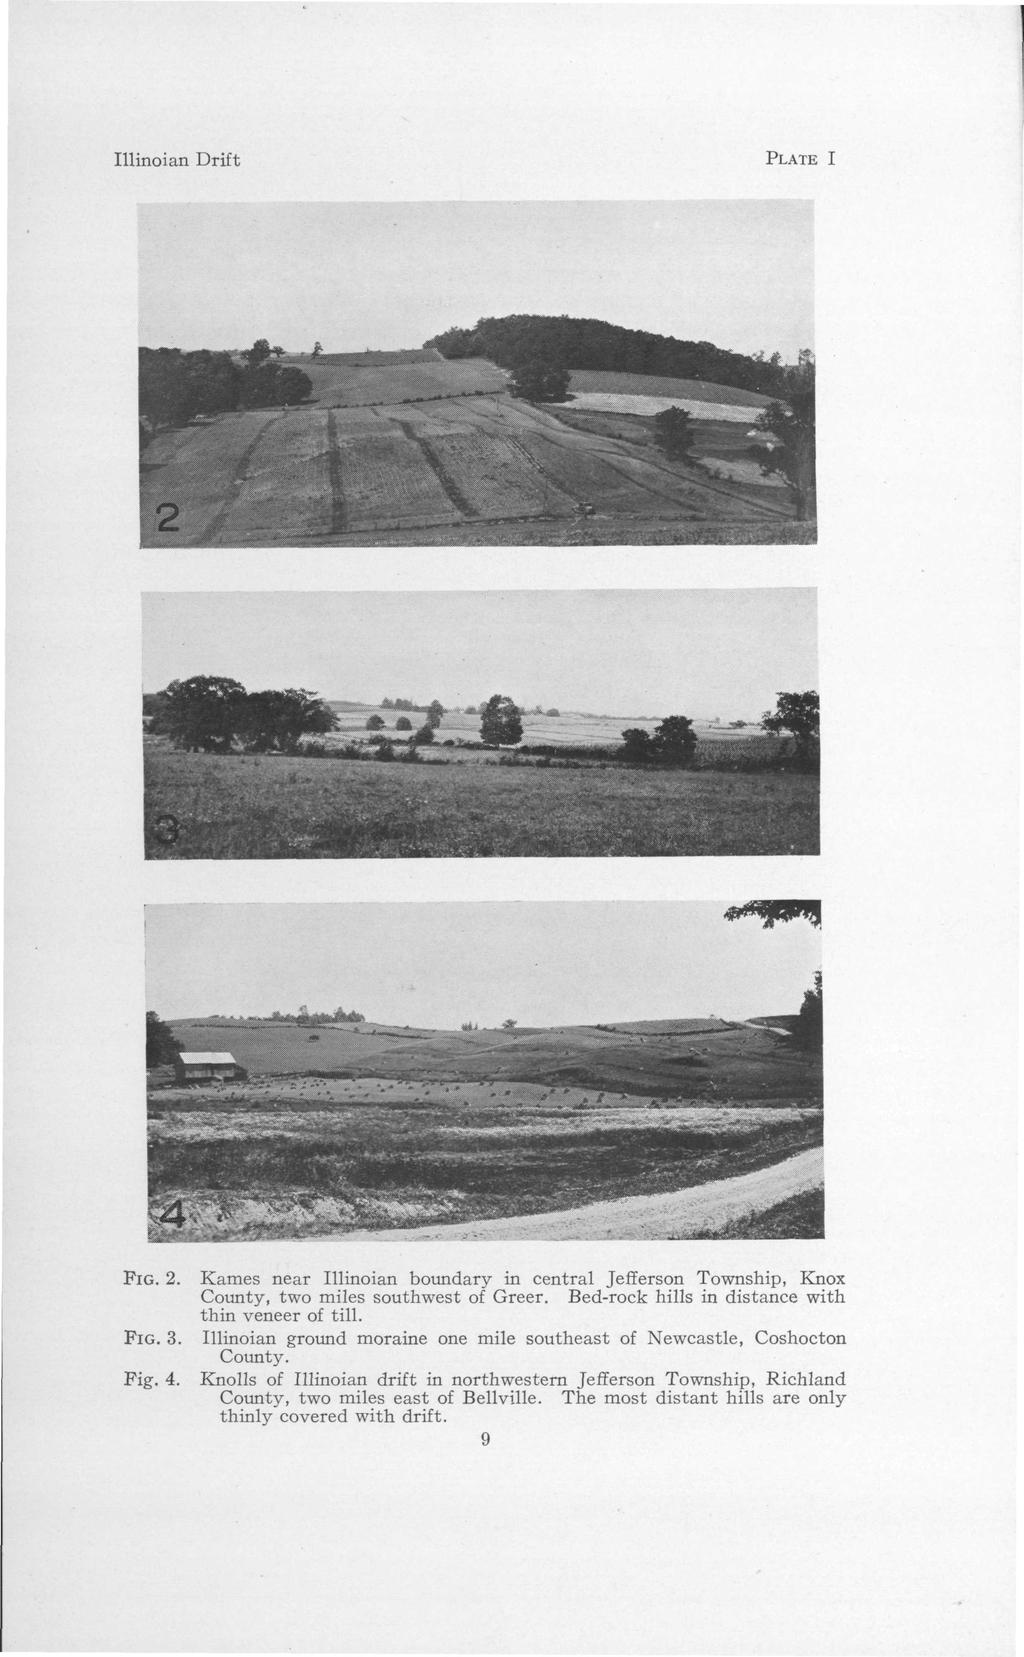 - ' :- ". Illinoian Drift PLATE I 2 FIG. 2. Kames near Illinoian boundary in central Jefferson Township, Knox County, two miles southwest of Greer. Bed-rock hills in distance with thin veneer of till.